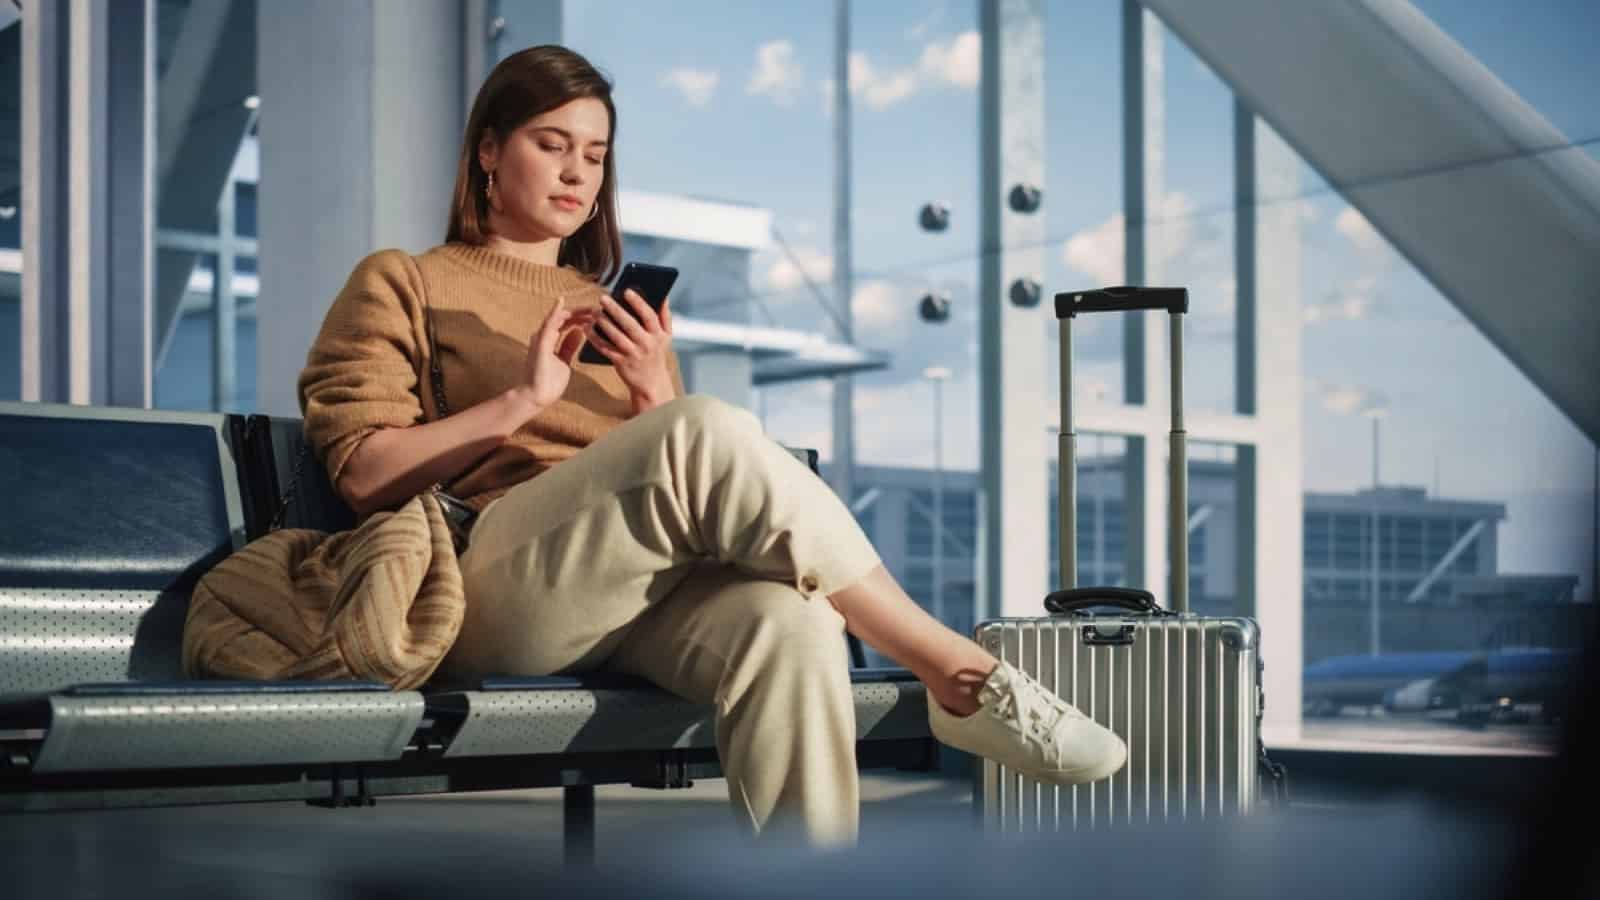 Woman in airport using mobile